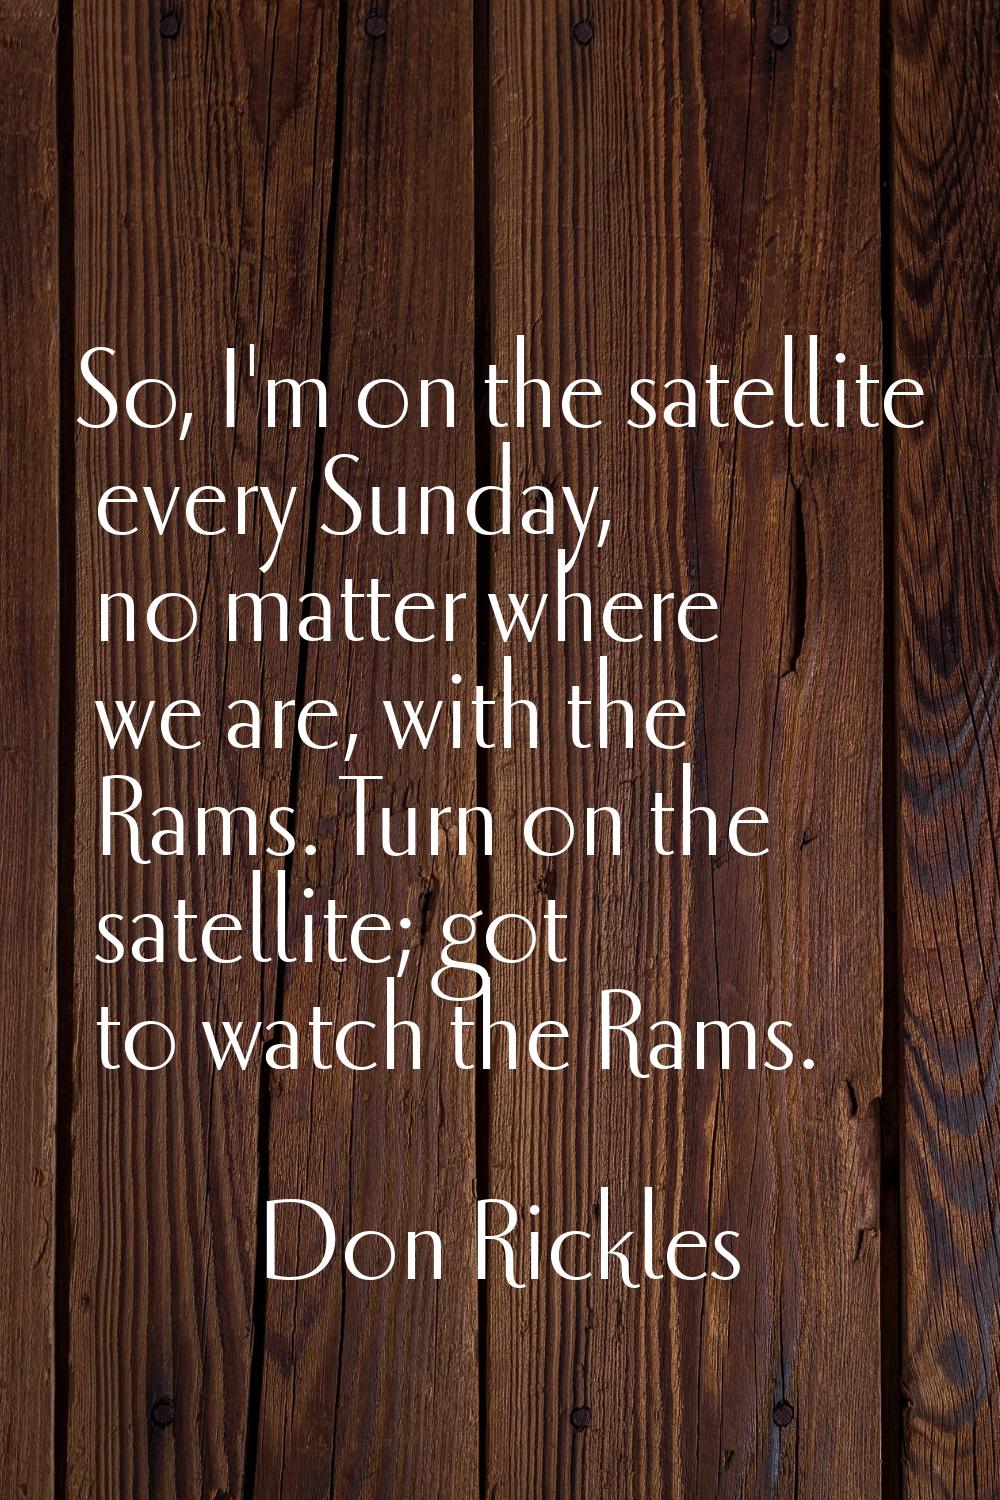 So, I'm on the satellite every Sunday, no matter where we are, with the Rams. Turn on the satellite